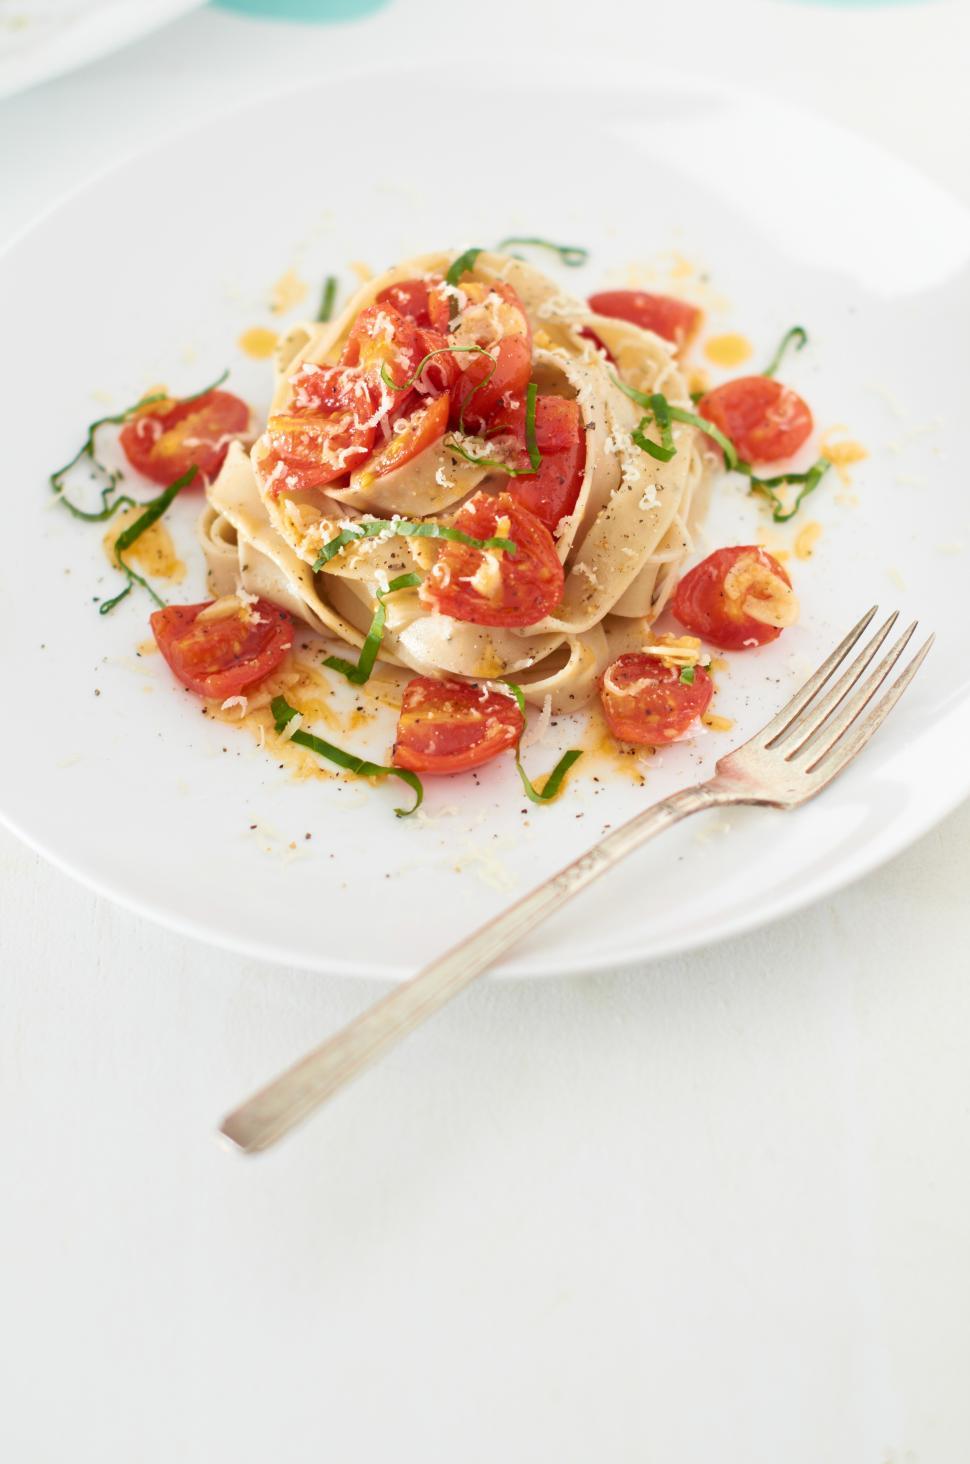 Free Image of A plate of pasta with tomatoes and cheese 